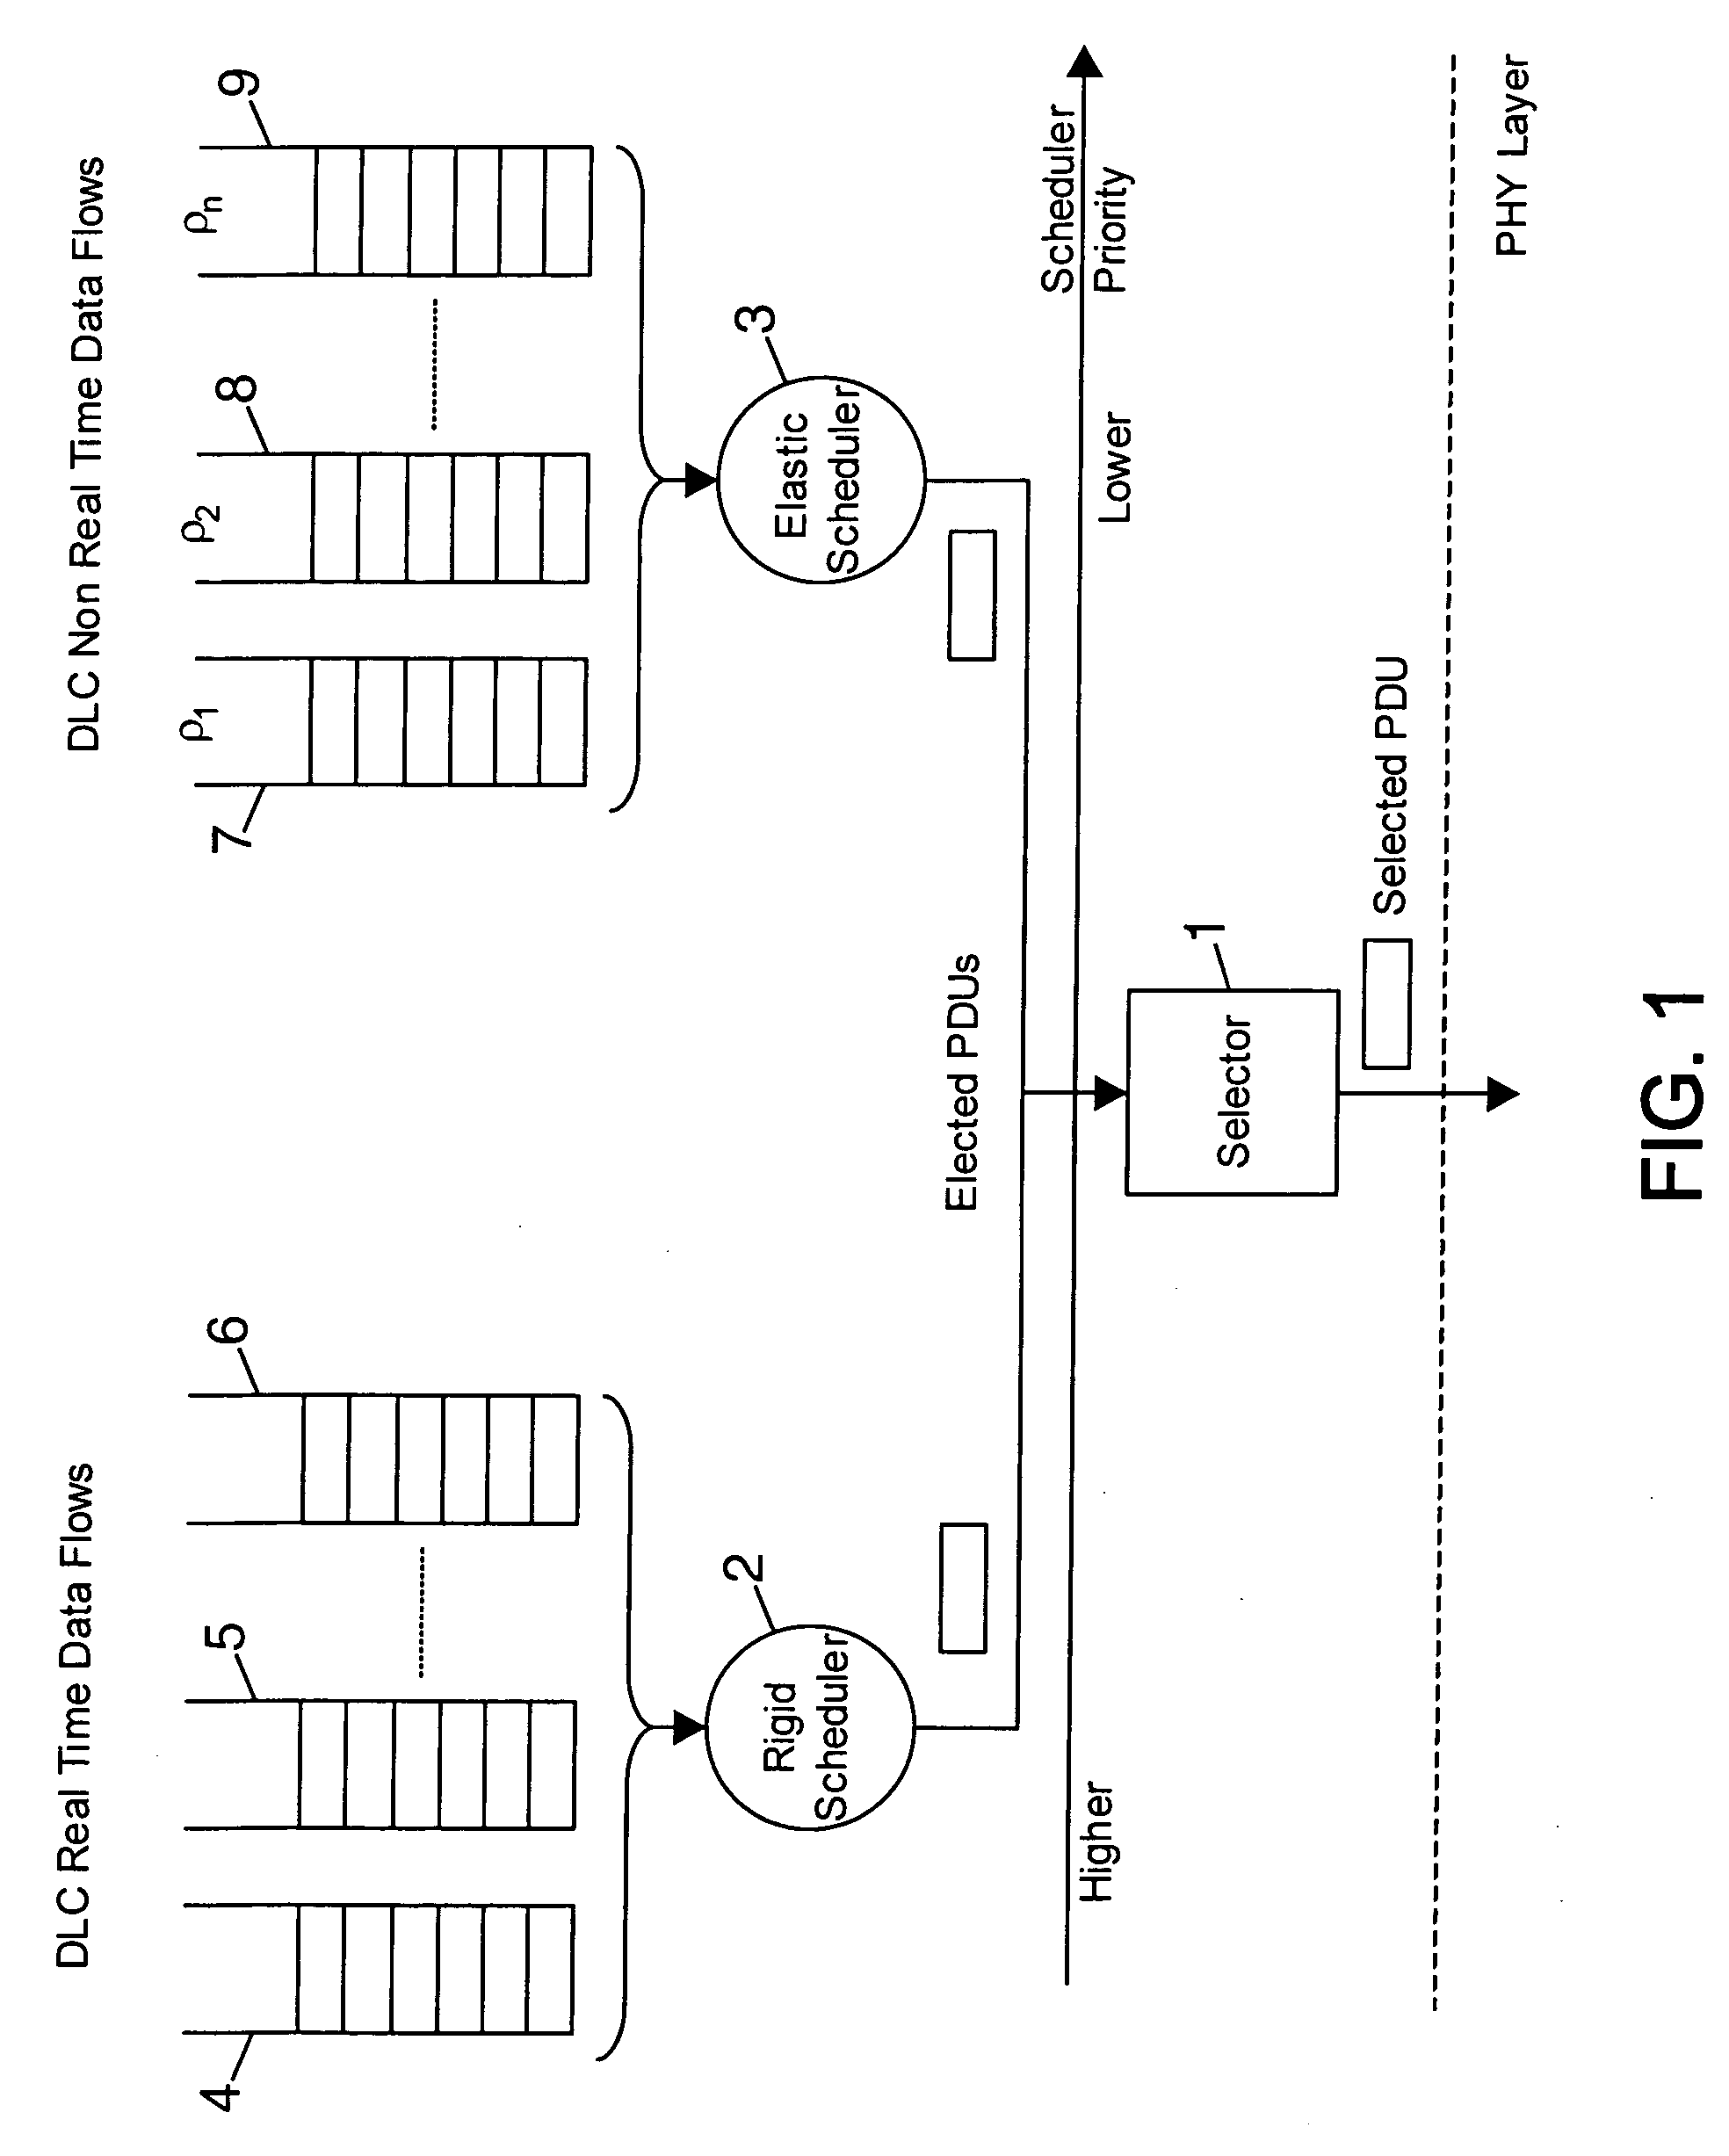 Method and device of dynamic resource allocation in a wireless network